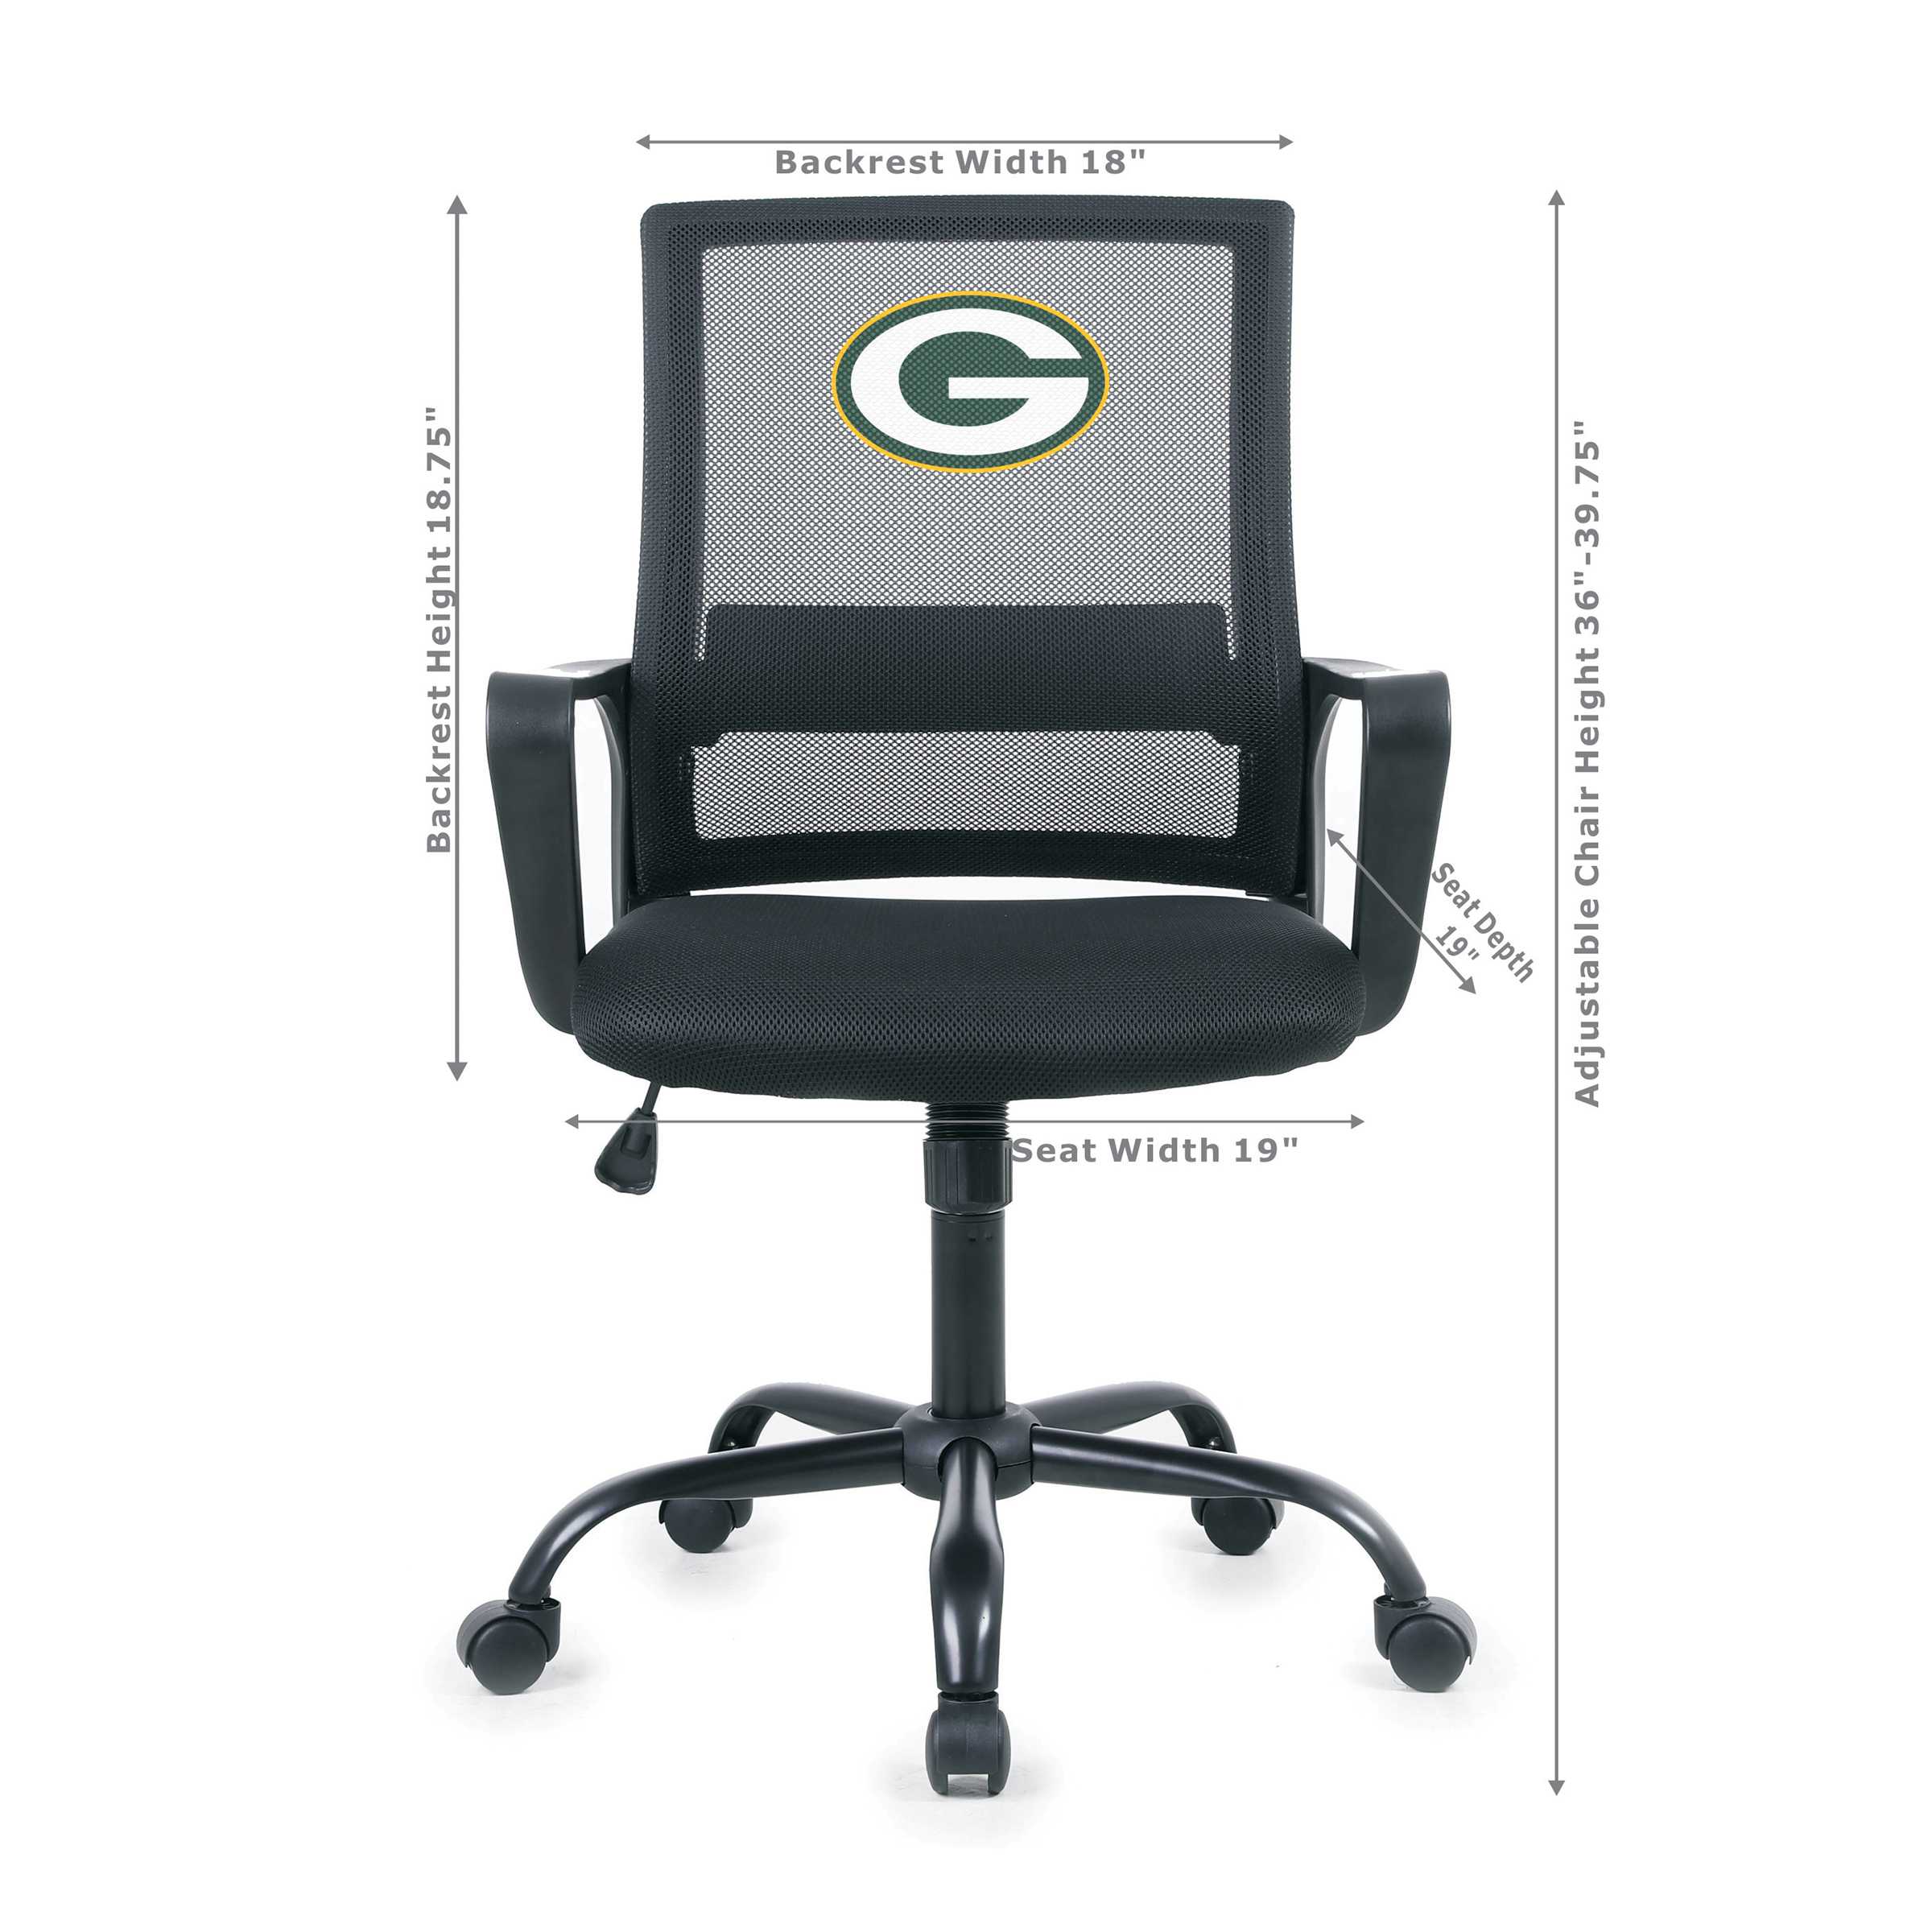 GREEN BAY PACKERS TASK CHAIR